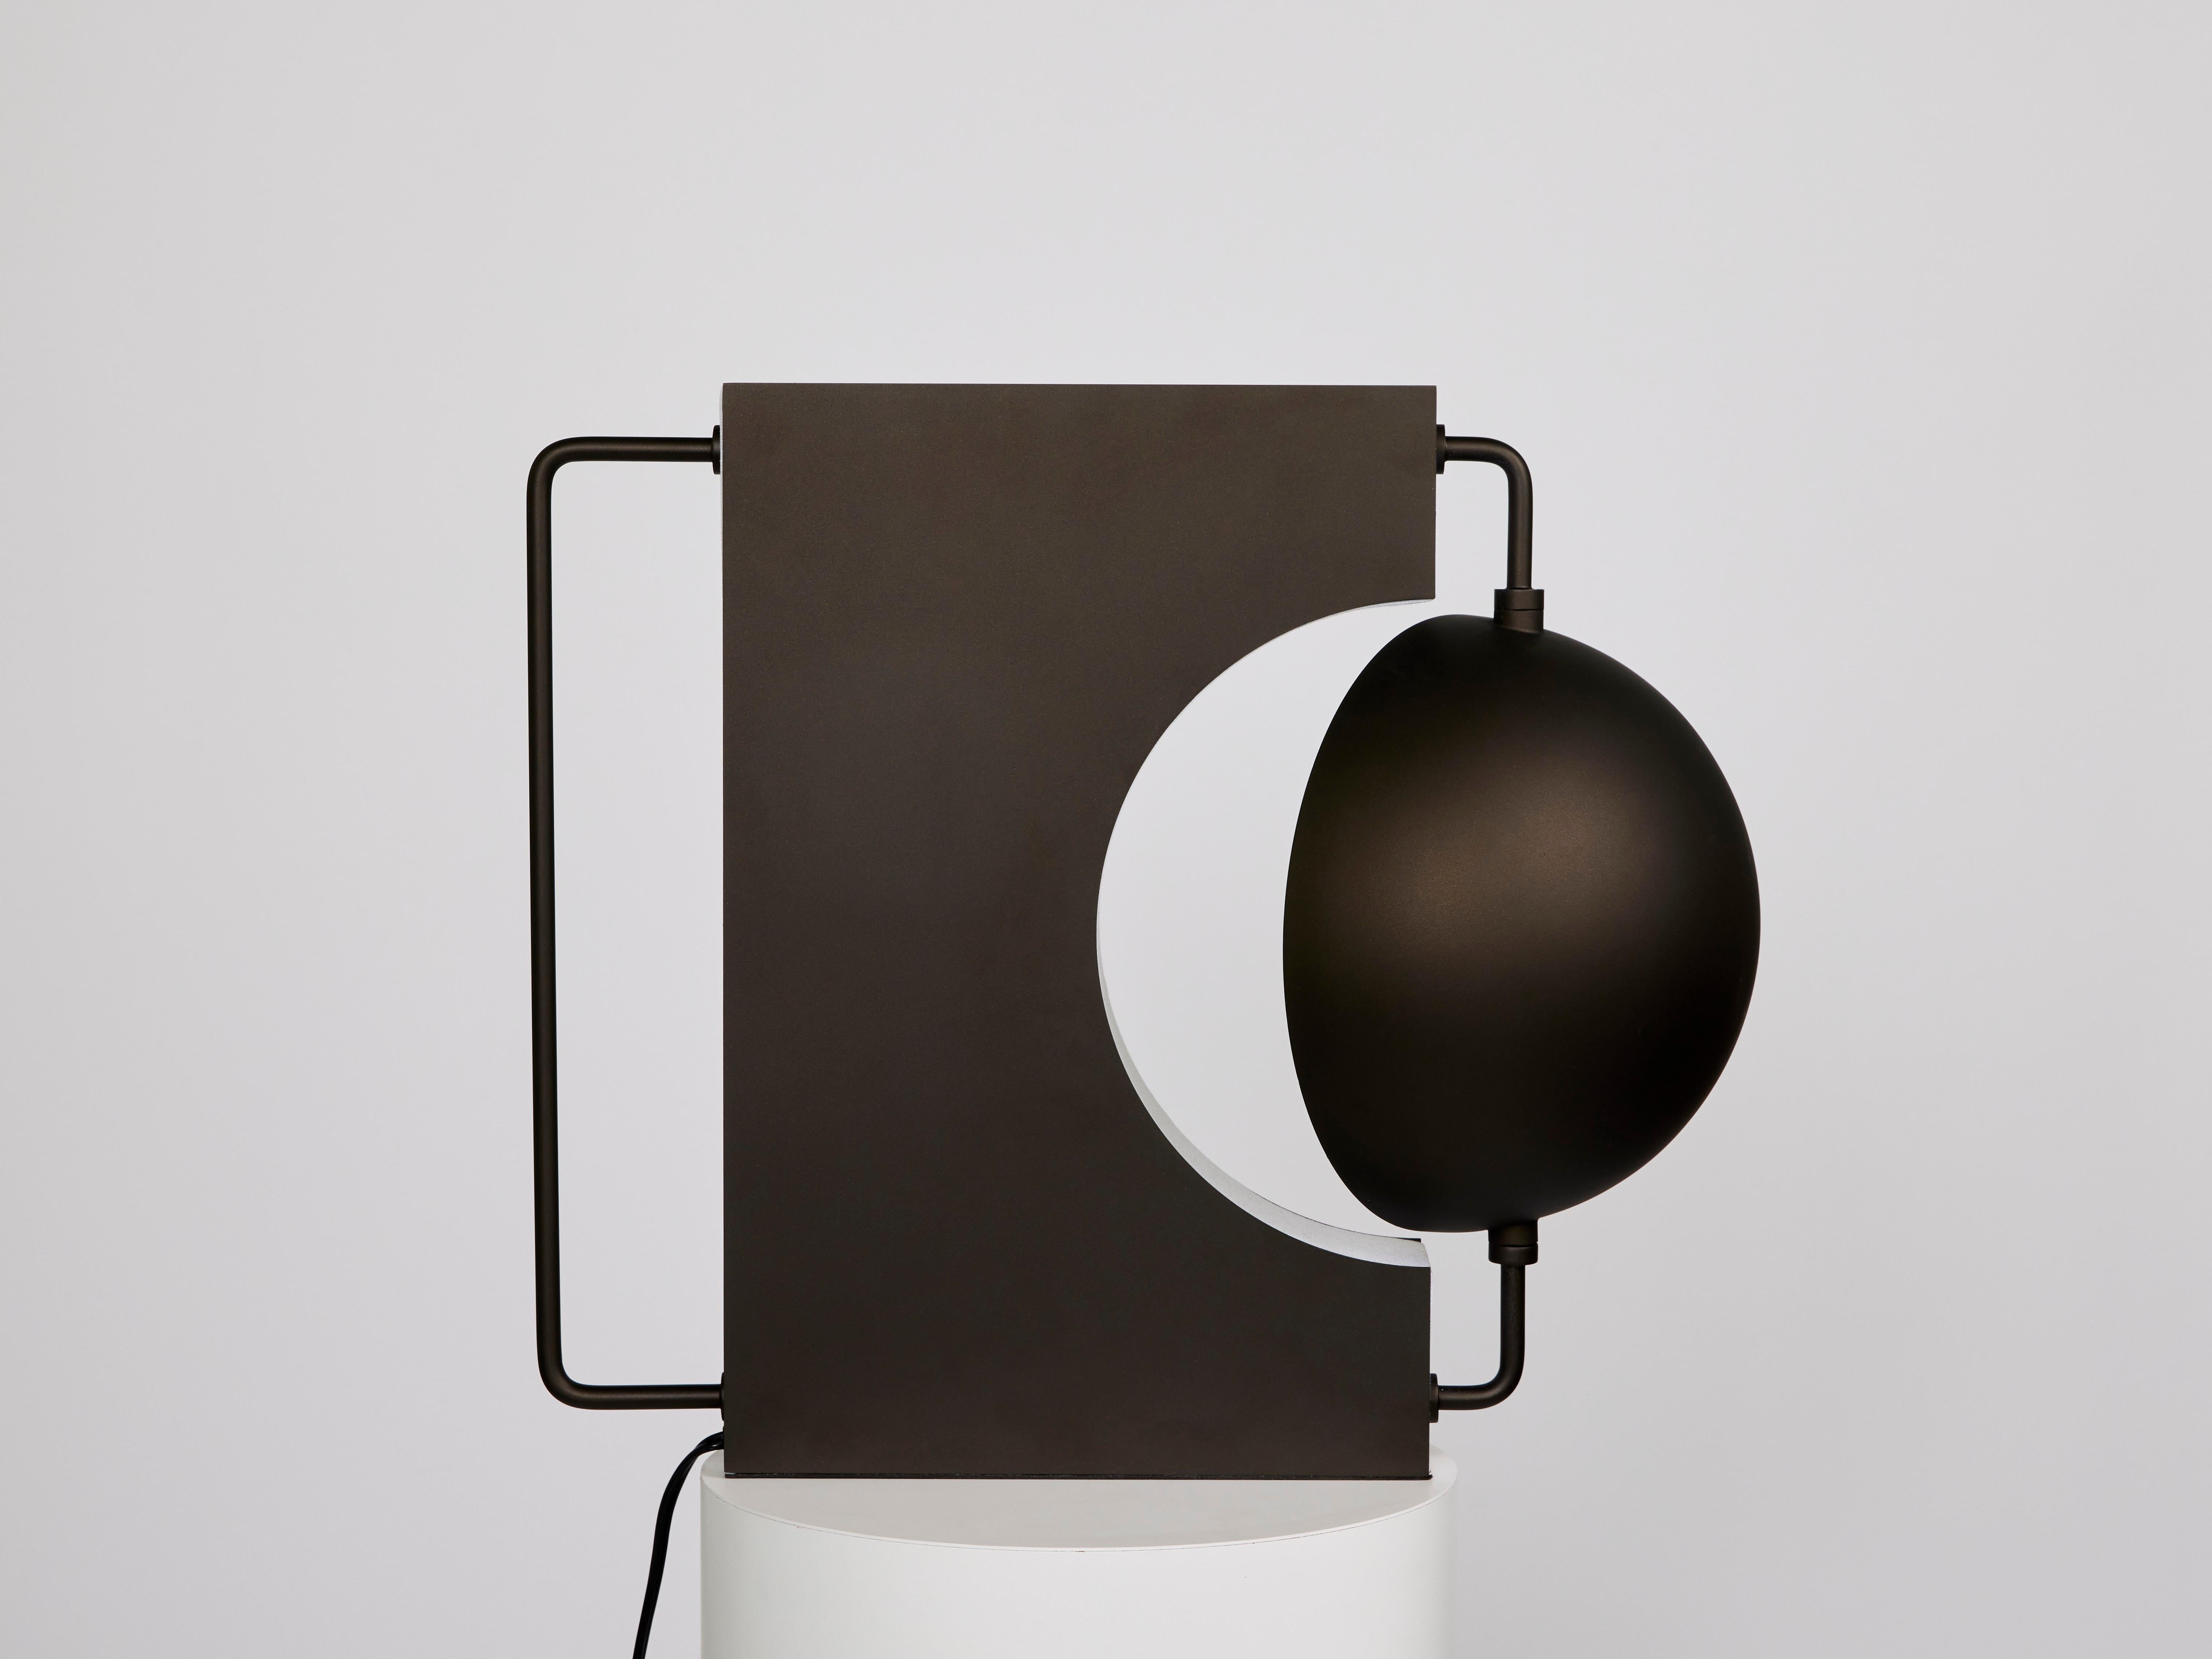 Half Table Lamp (Black)

Materials: powder-coated golden black 
Dimensions: W20 x D11 x H17 inches
Lamping: G9 2700K/3000K dimmable, UL Listed.


A table lamp that plays with contrasting elements of roundness and sharpness, darkness and